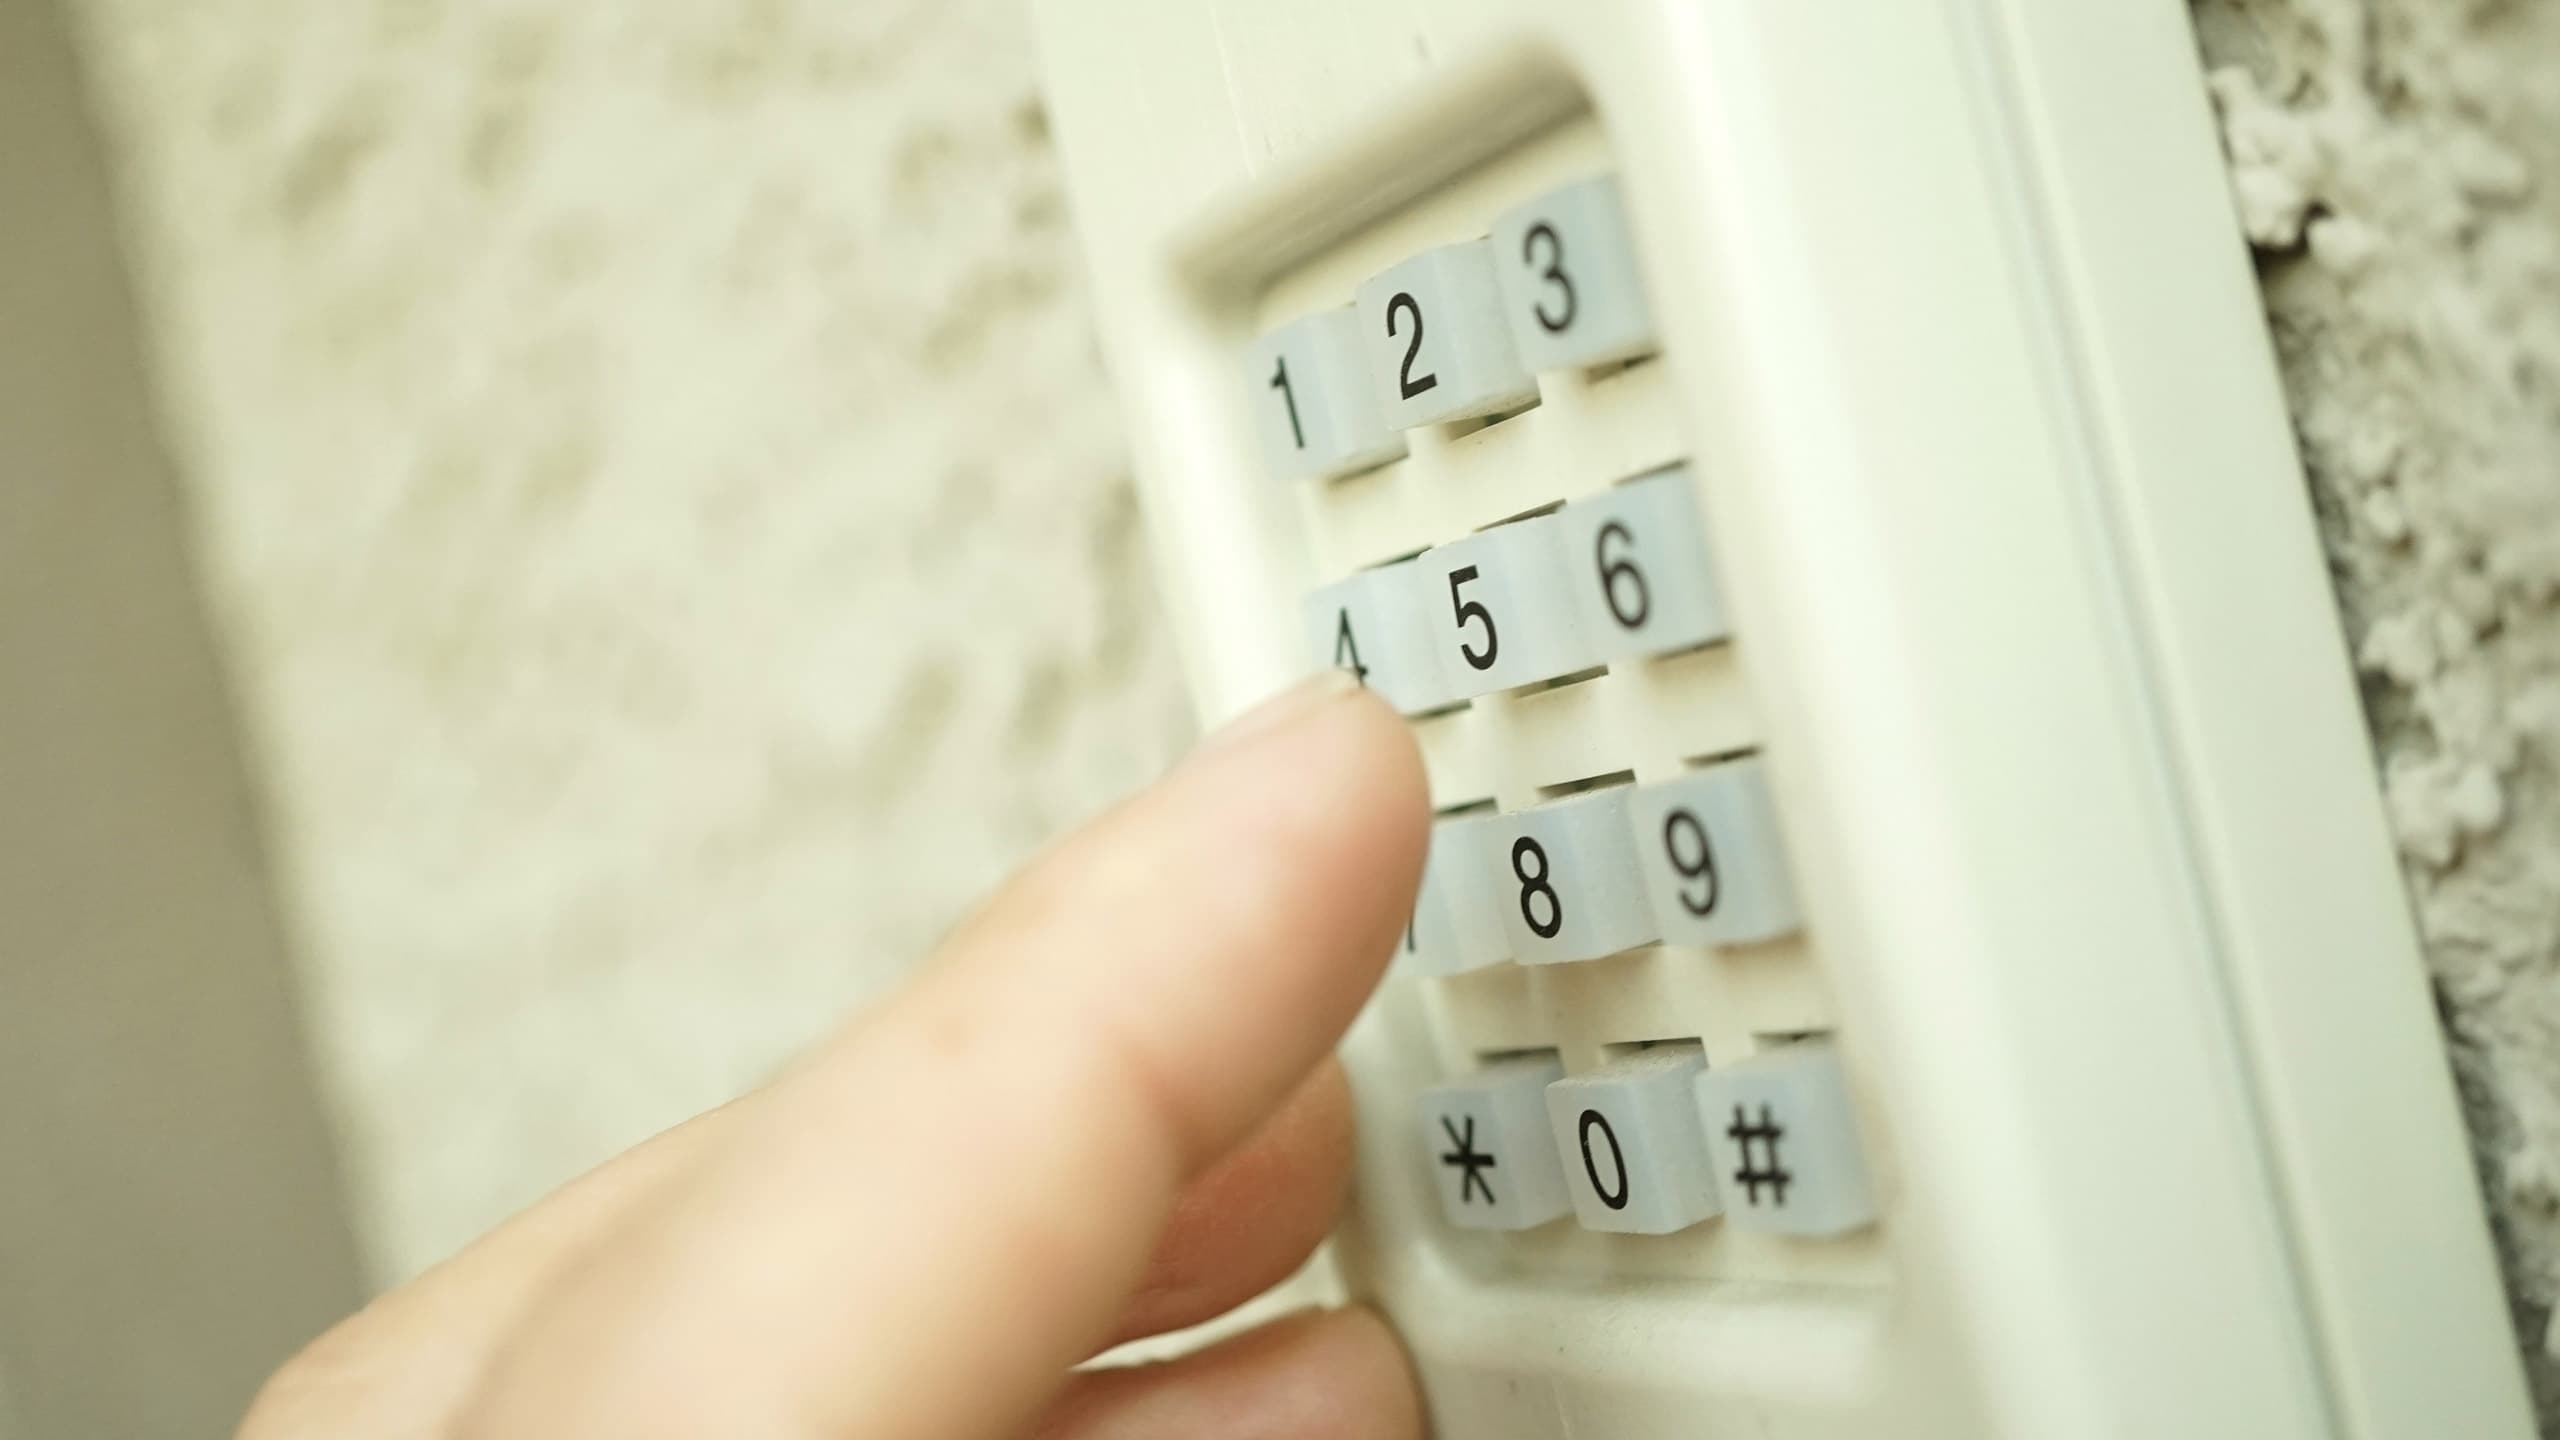 Close-up of a person pressing buttons on a beige exterior garage door keyless entry keypad